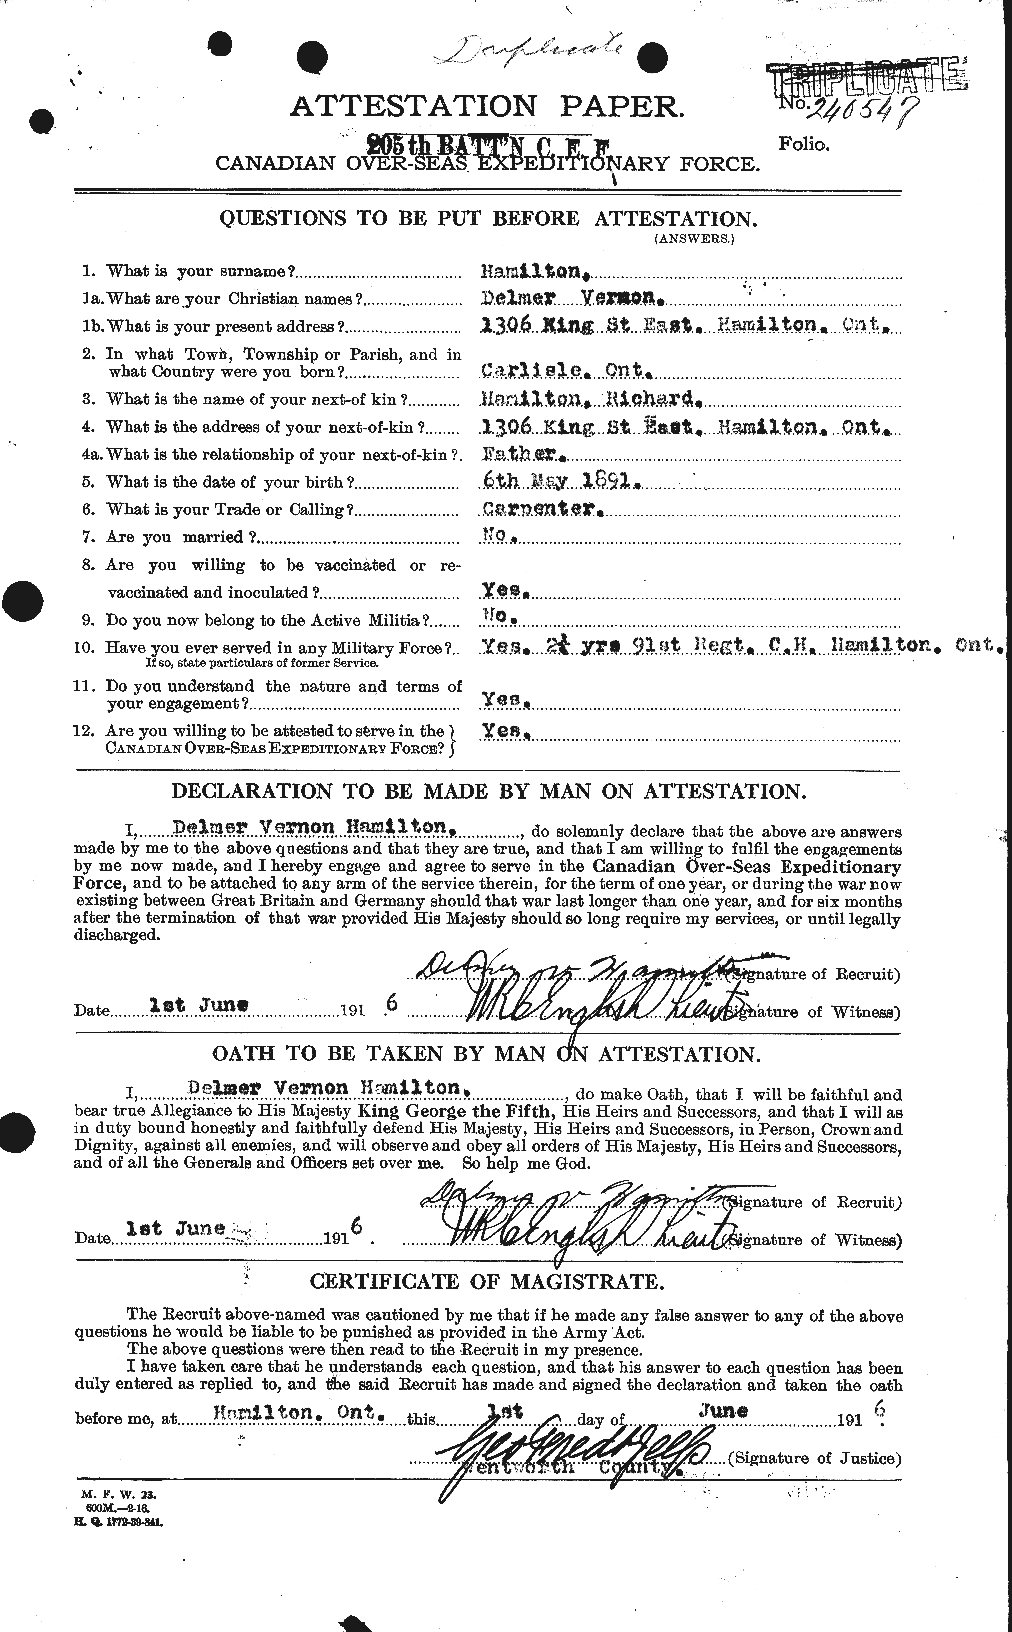 Personnel Records of the First World War - CEF 375358a